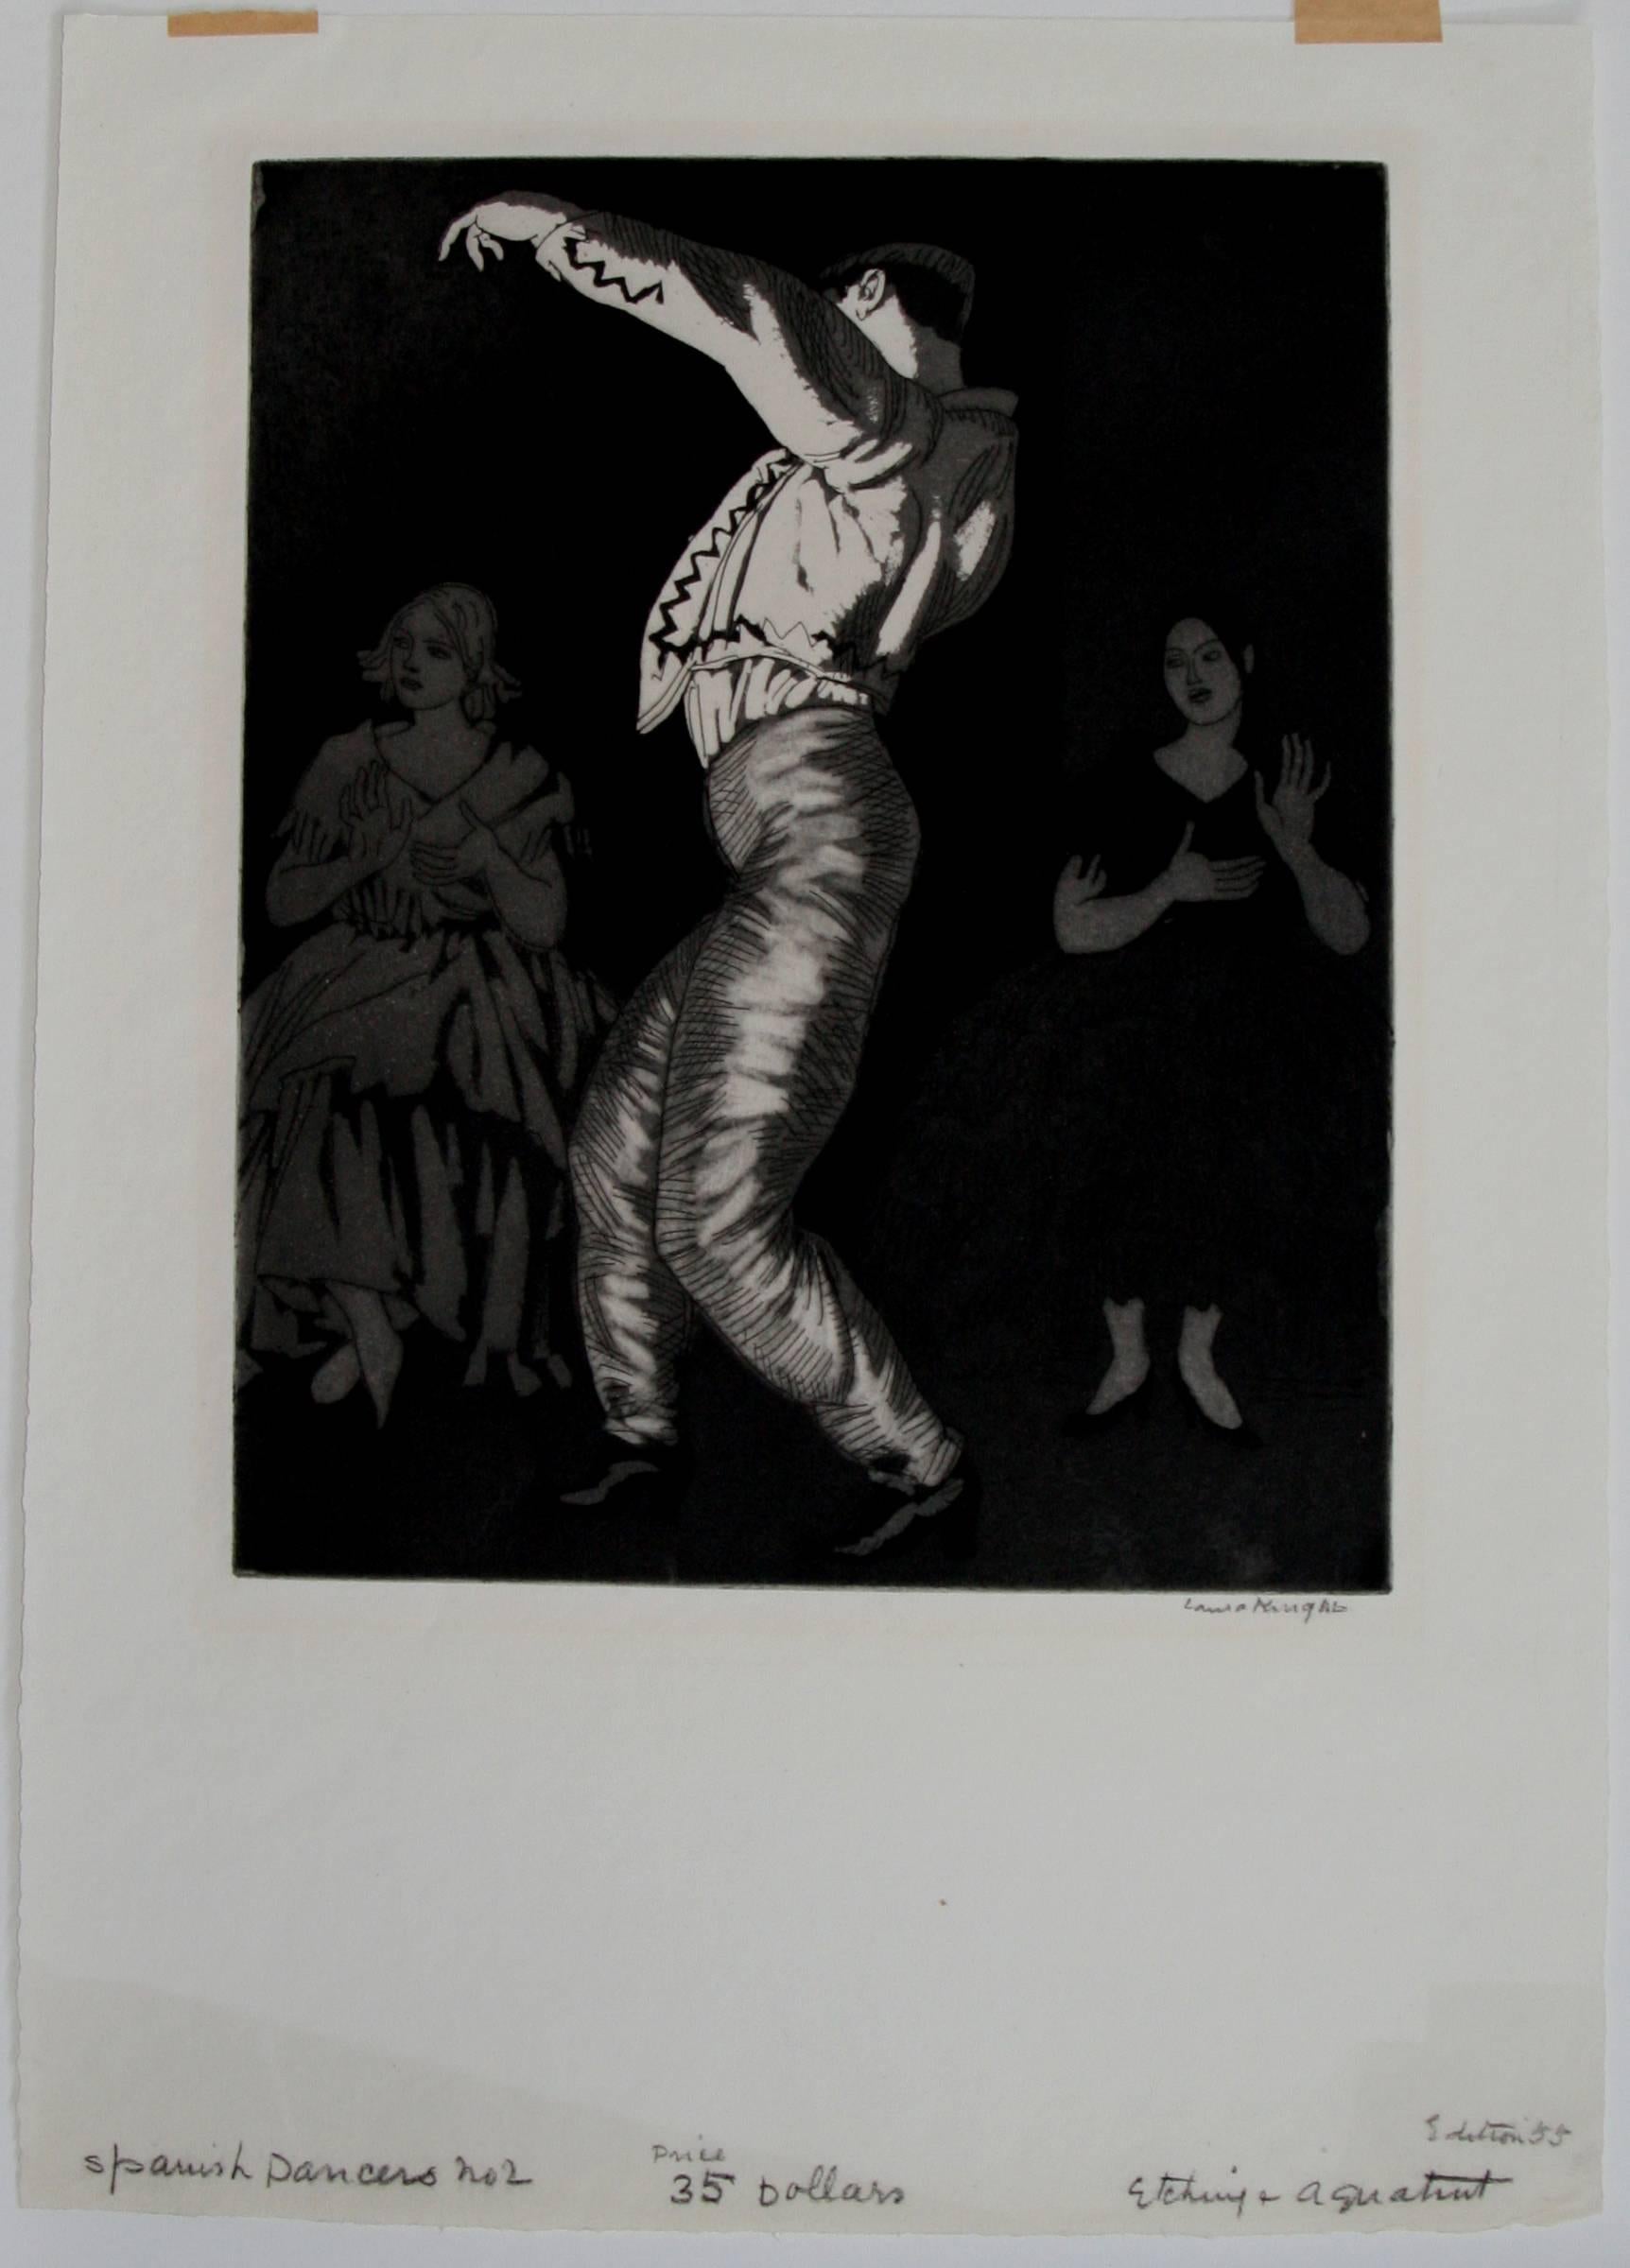 Spanish Dancer No. 2. - Print by Dame Laura Knight